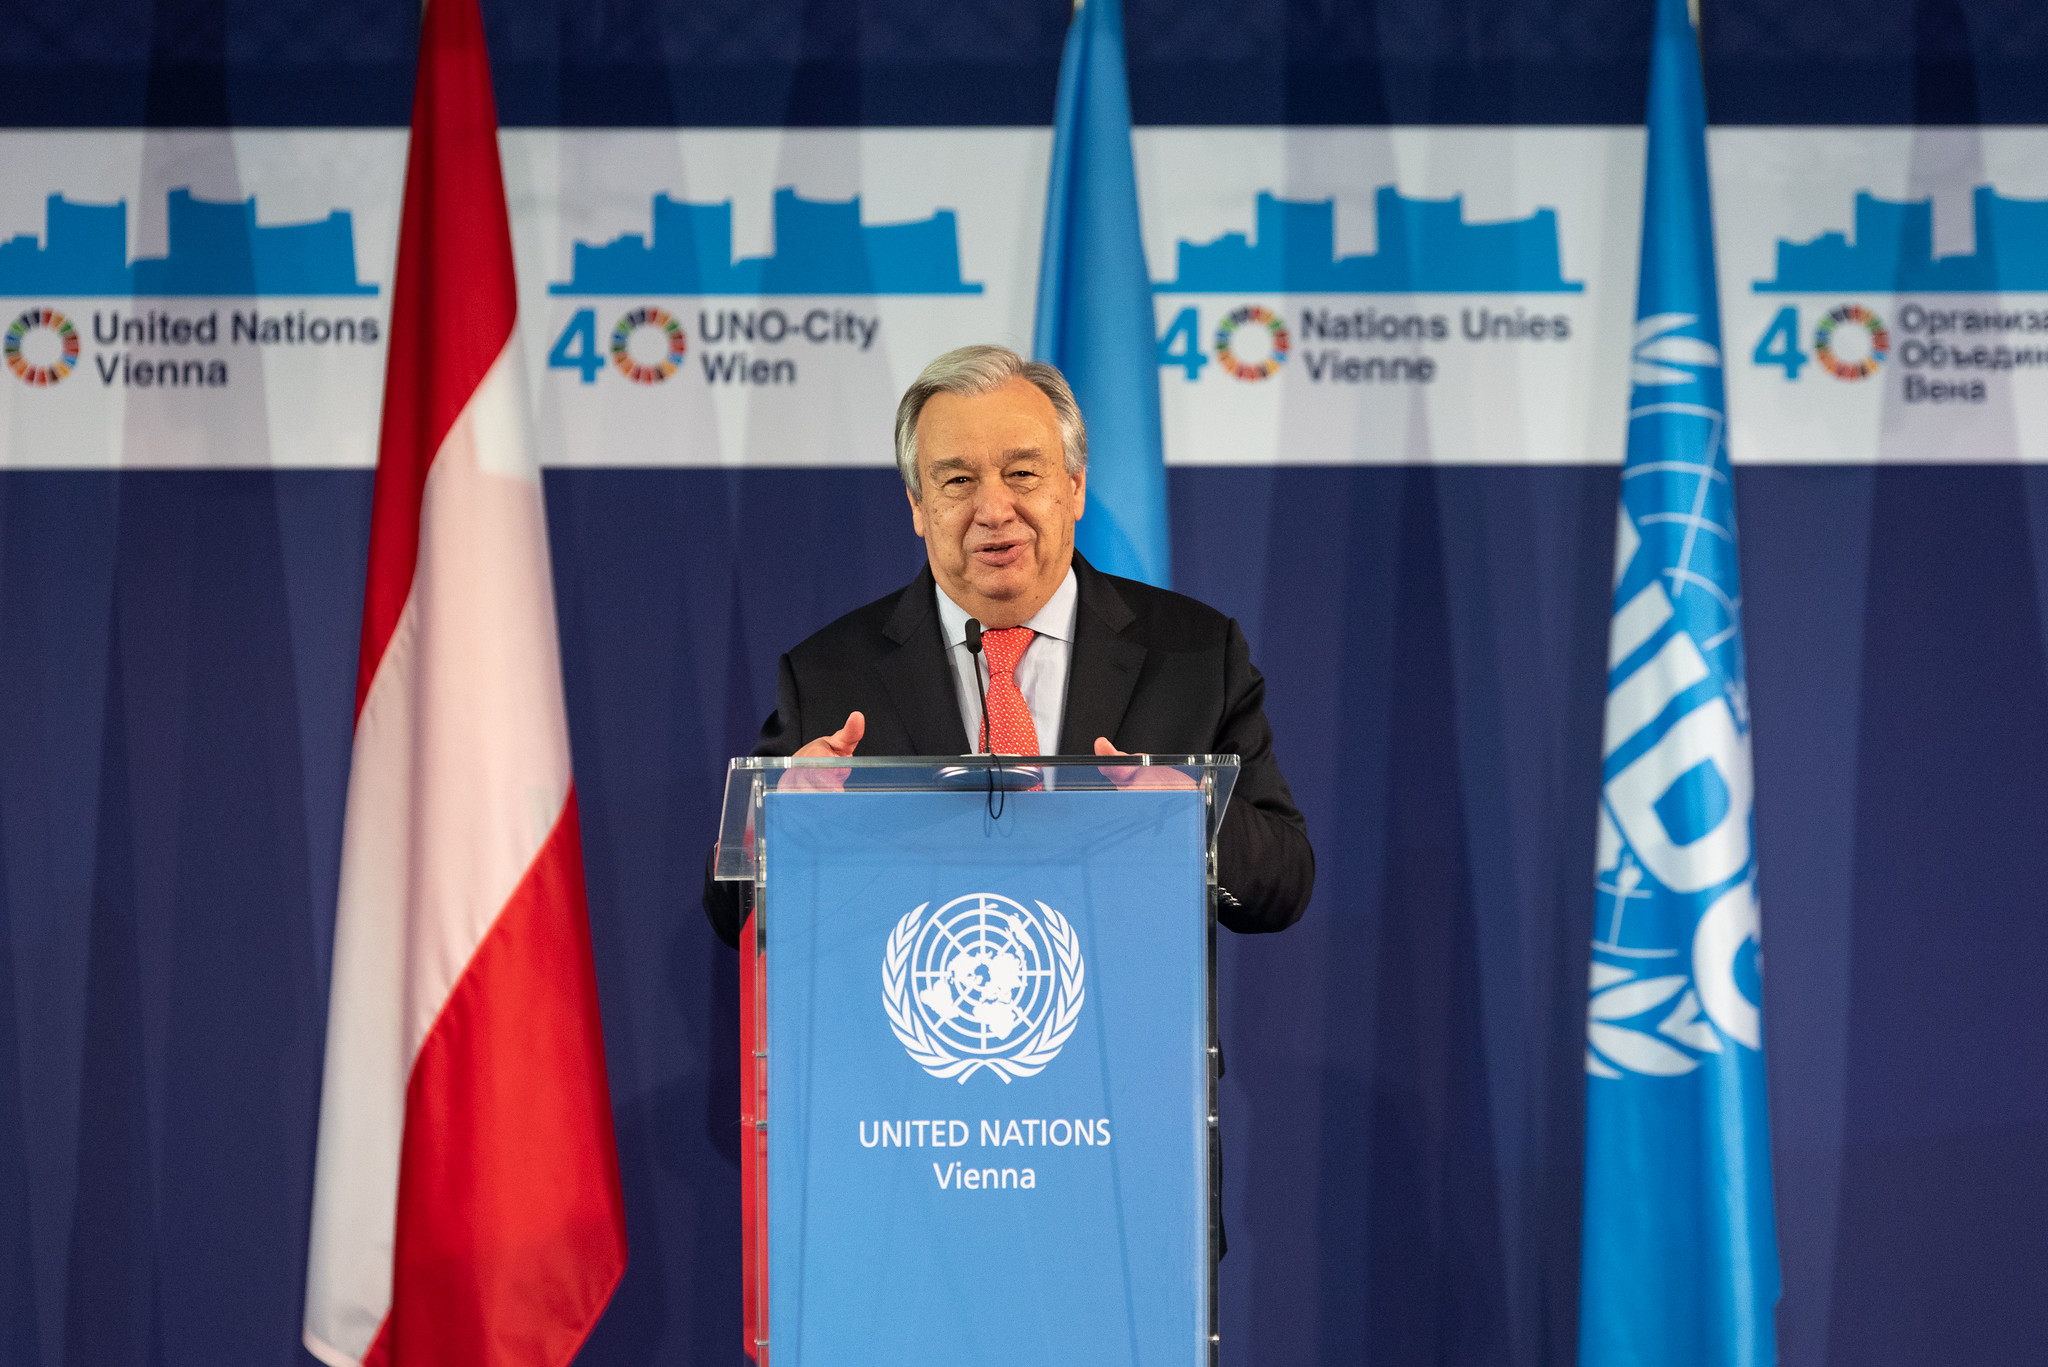 <p><sub>Secretary-General António Guterres at the <a href="/unis/en/events/2019/vic40.html">40th Anniversary of the Vienna International Centre</a> in 2019.</sub></p>